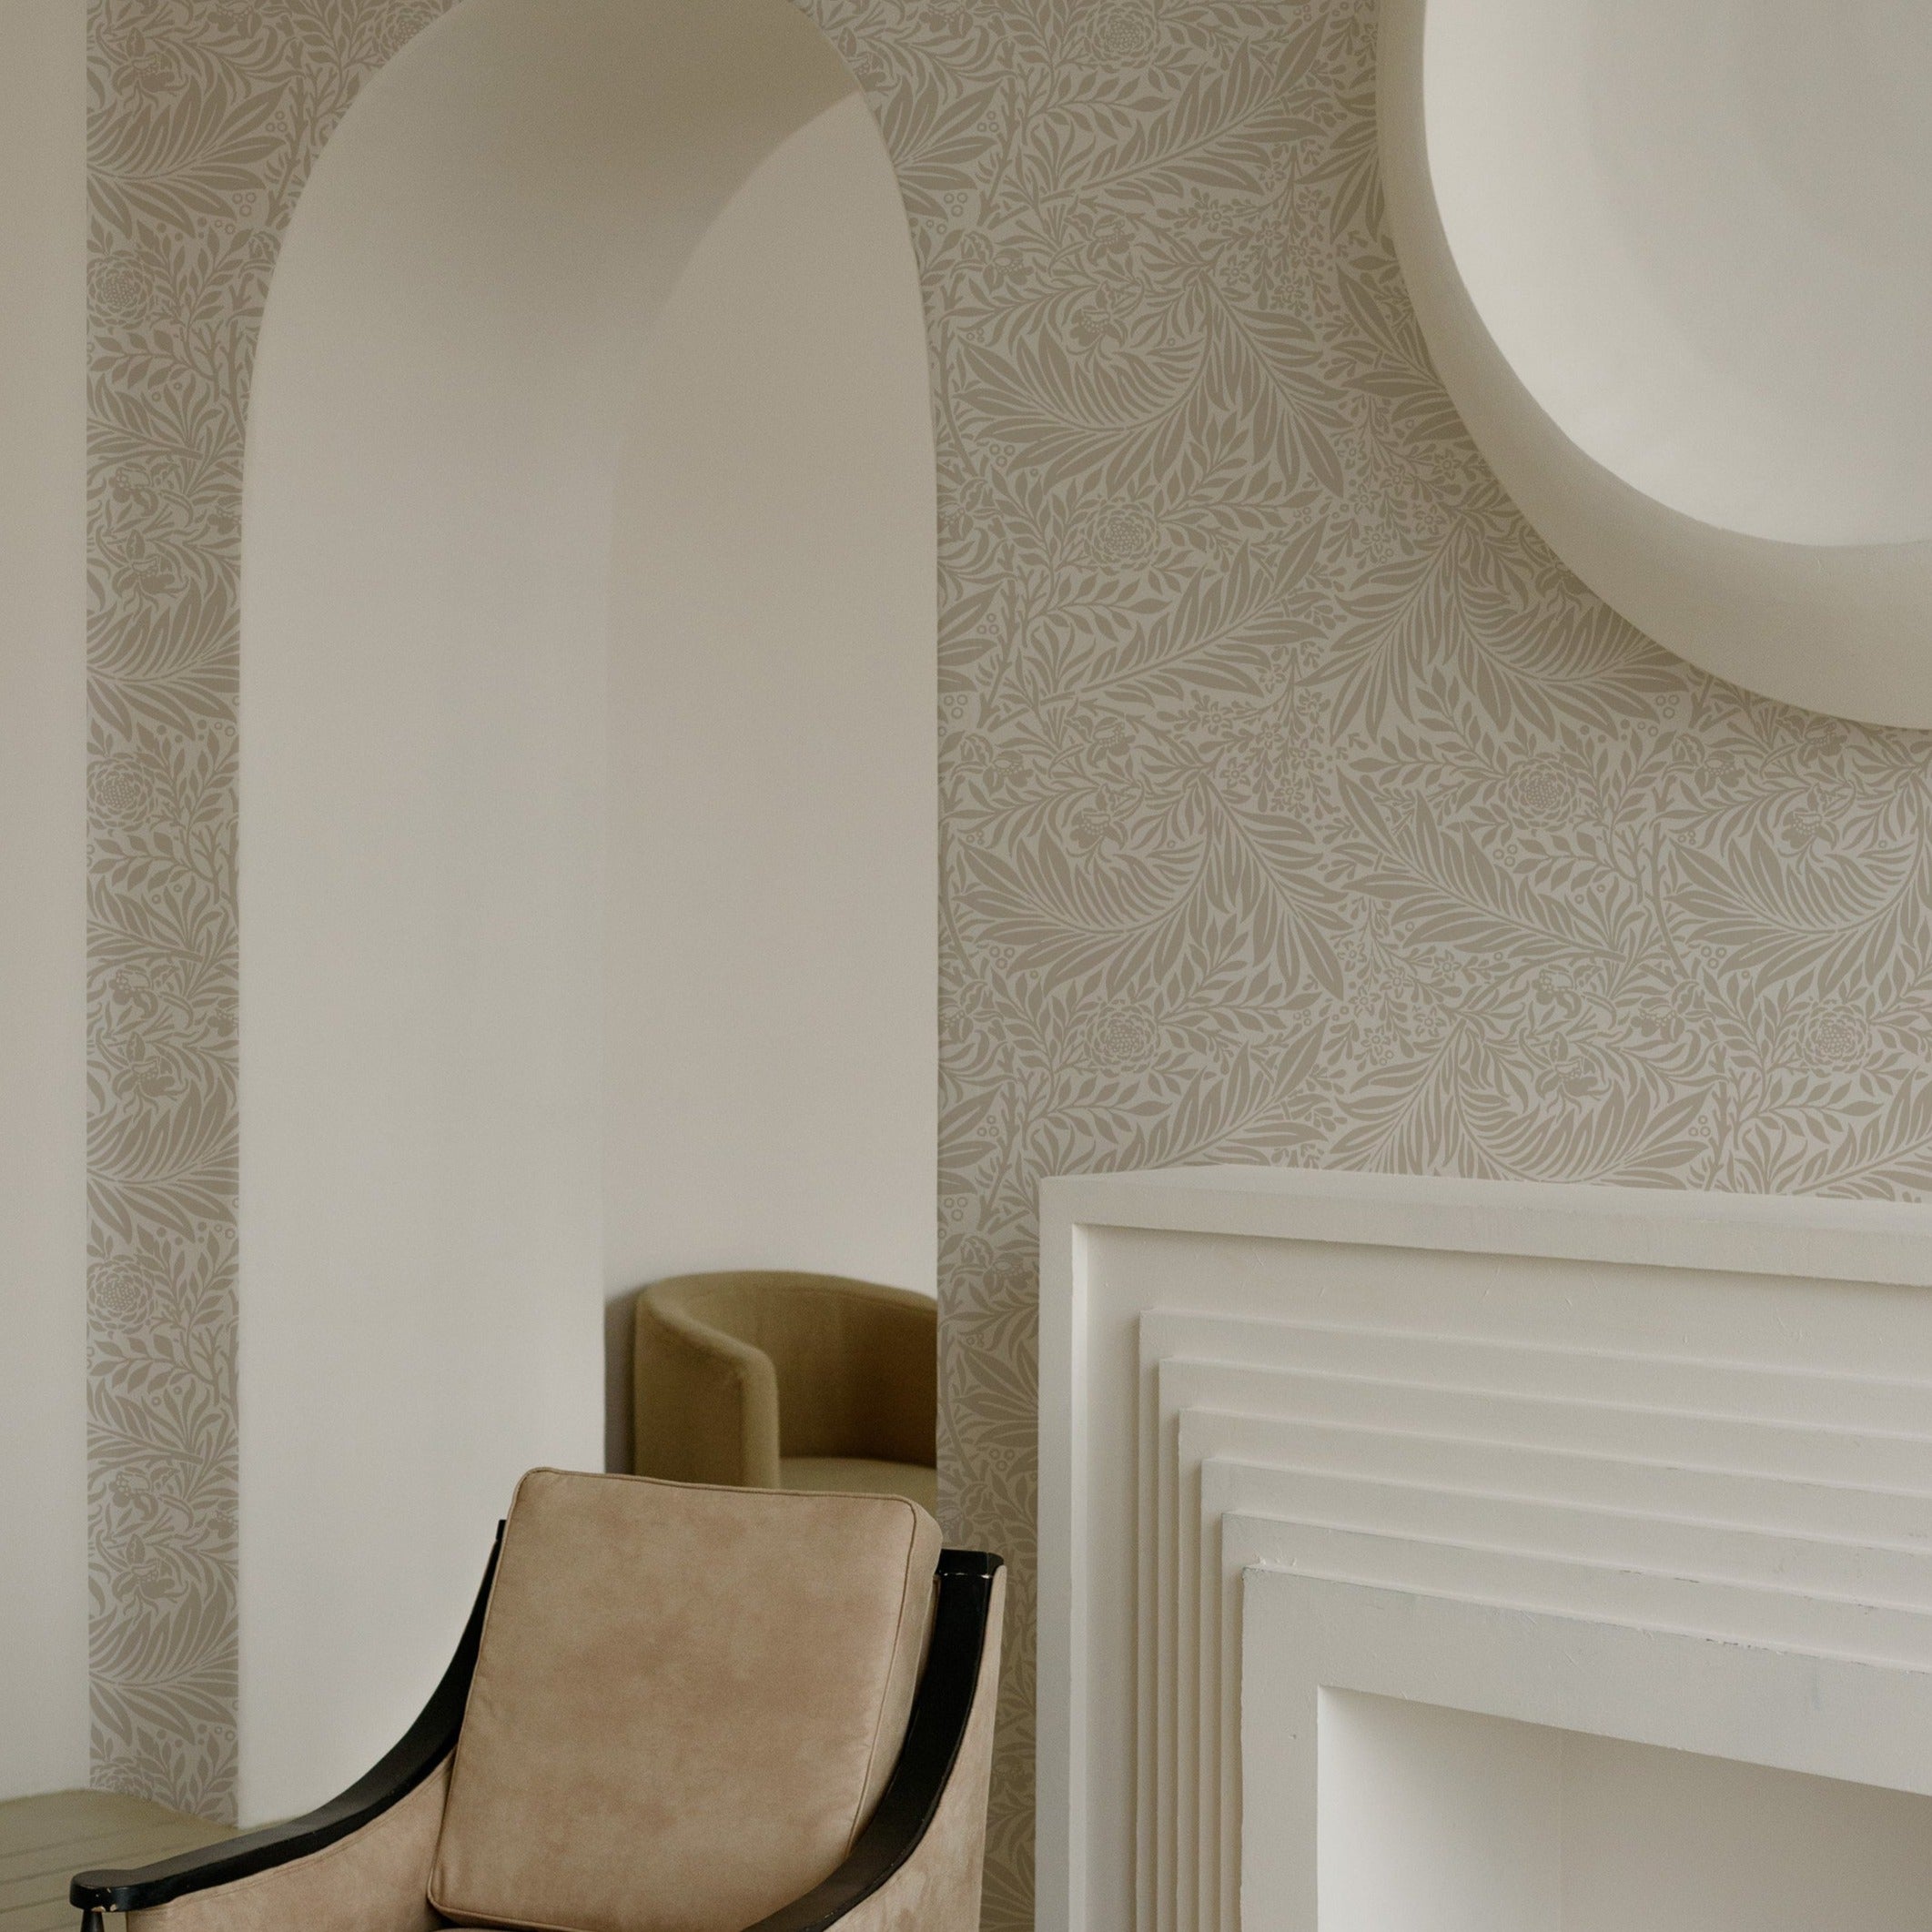 A cozy nook featuring the 'William Bough Wallpaper' with a detailed botanical design behind an archway, complemented by a modern armchair and an elegant white fireplace